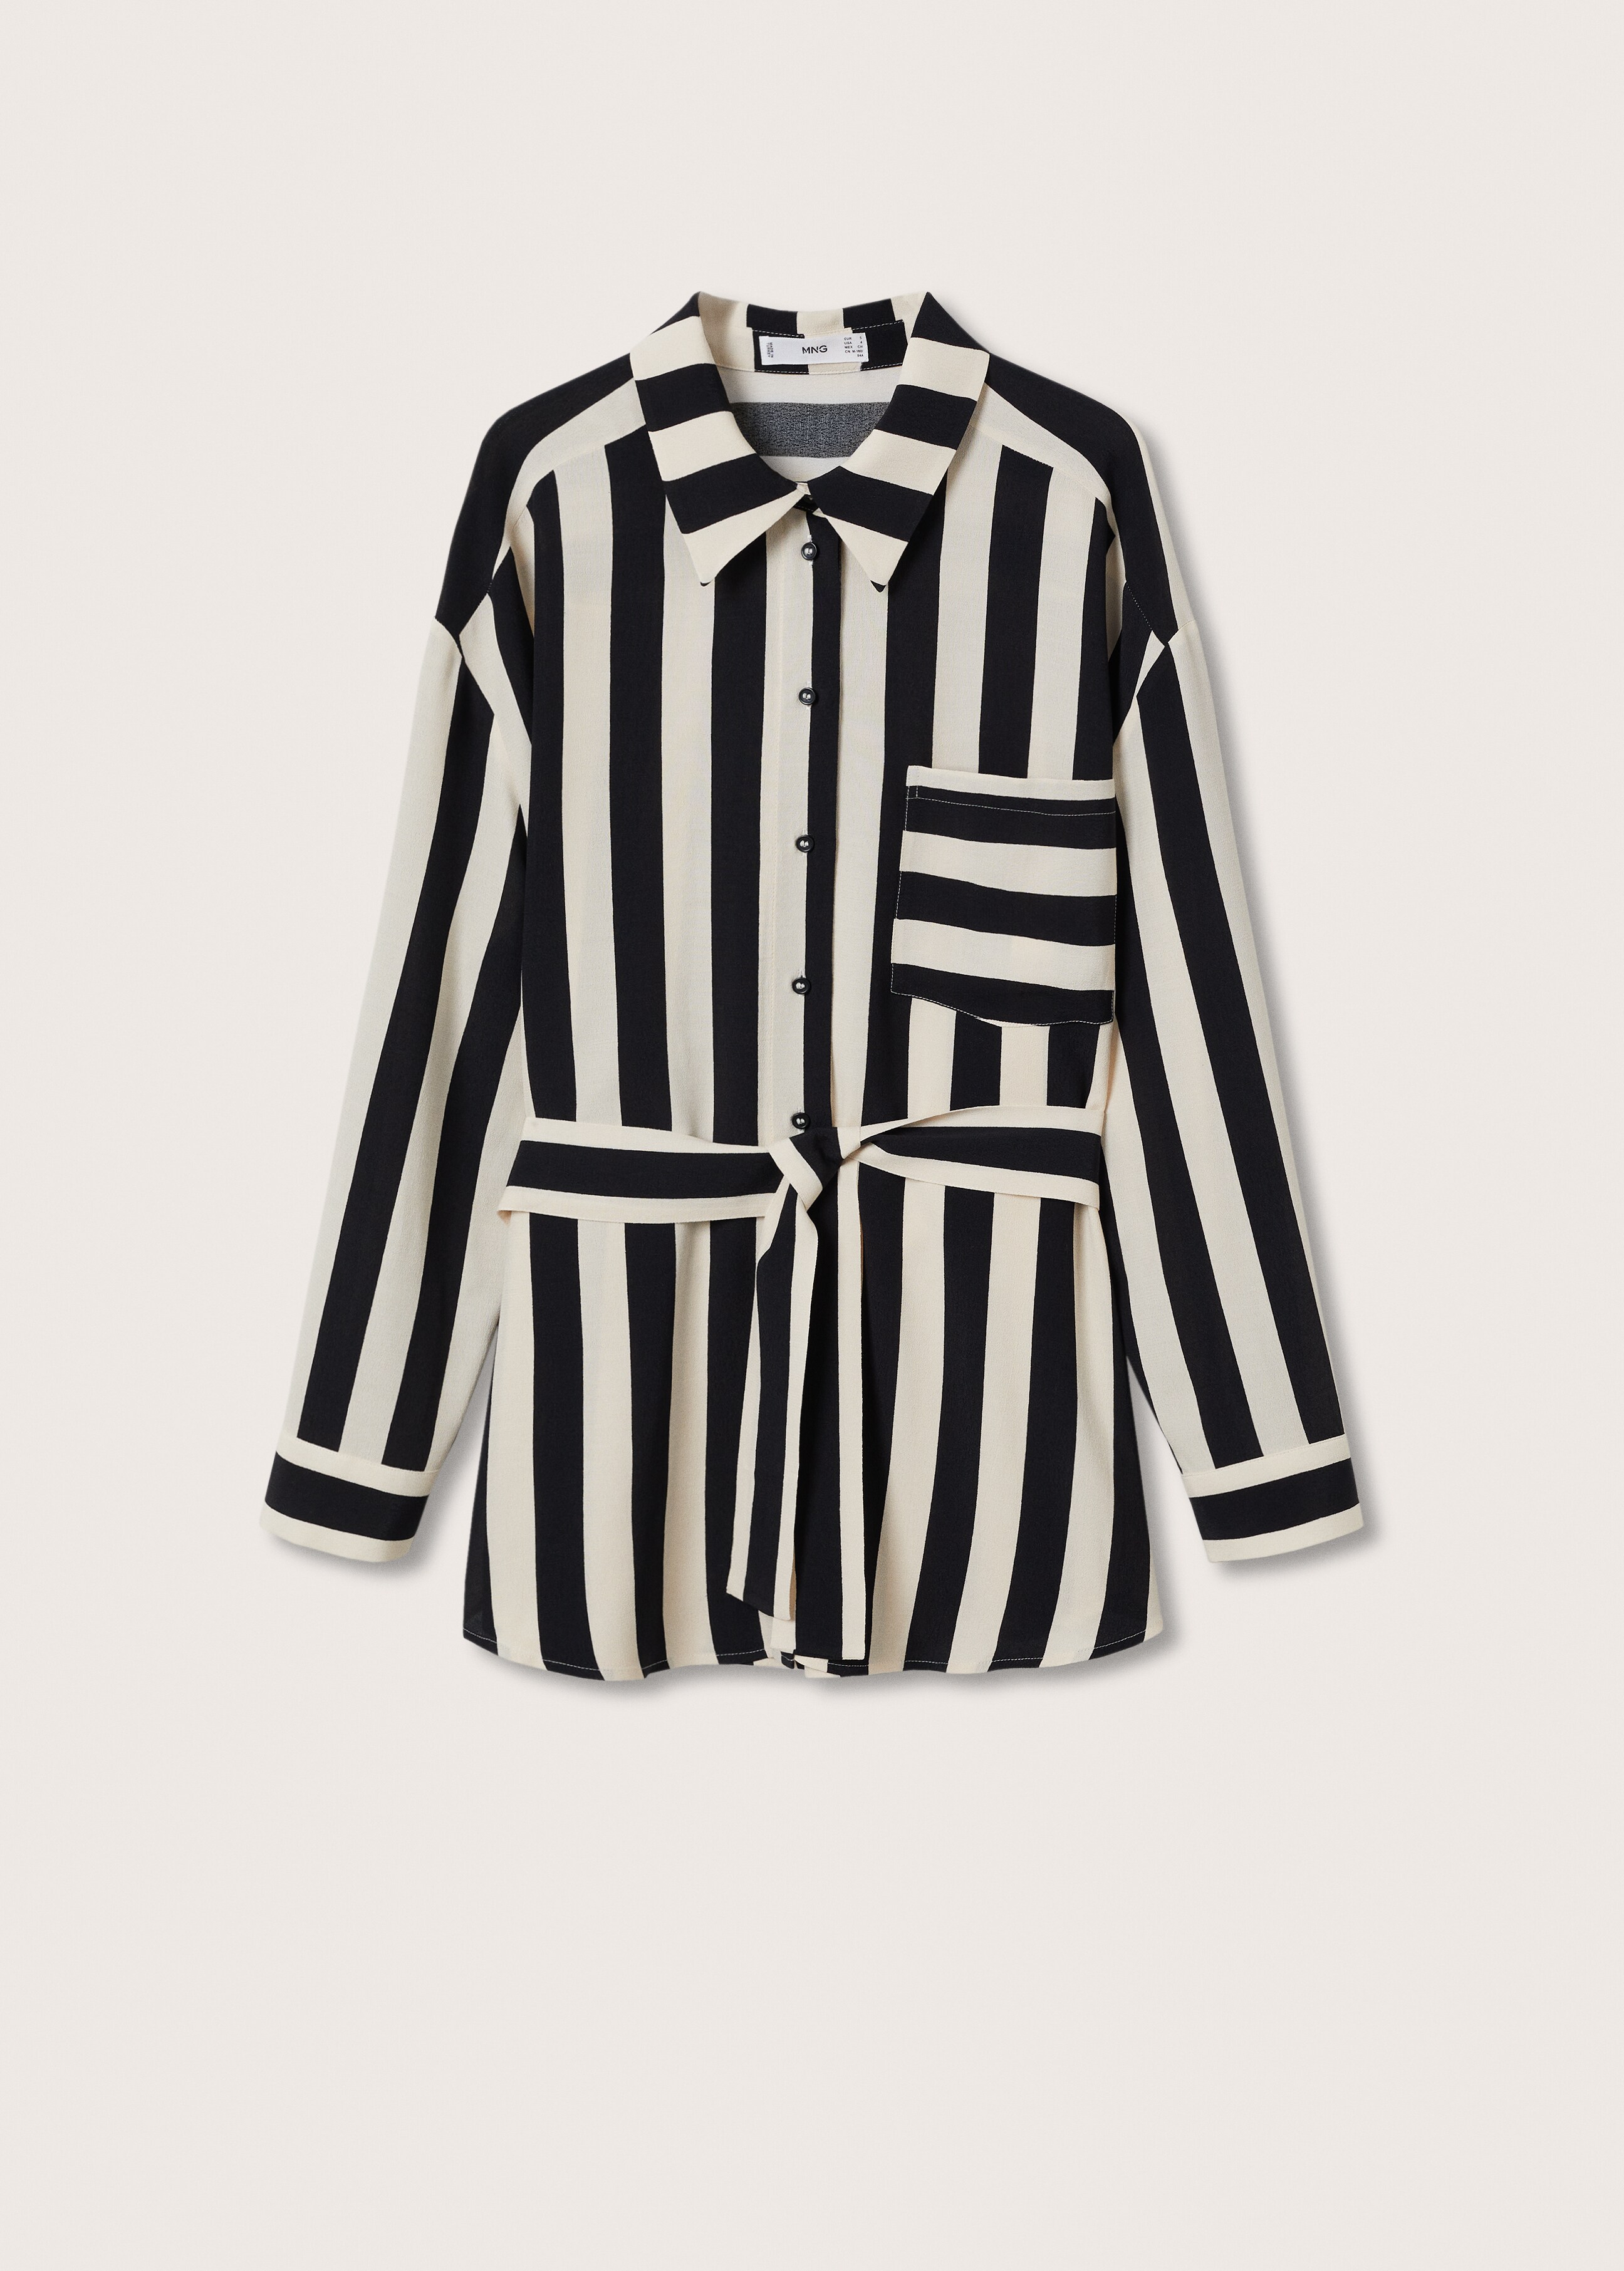 Oversize striped shirt - Article without model